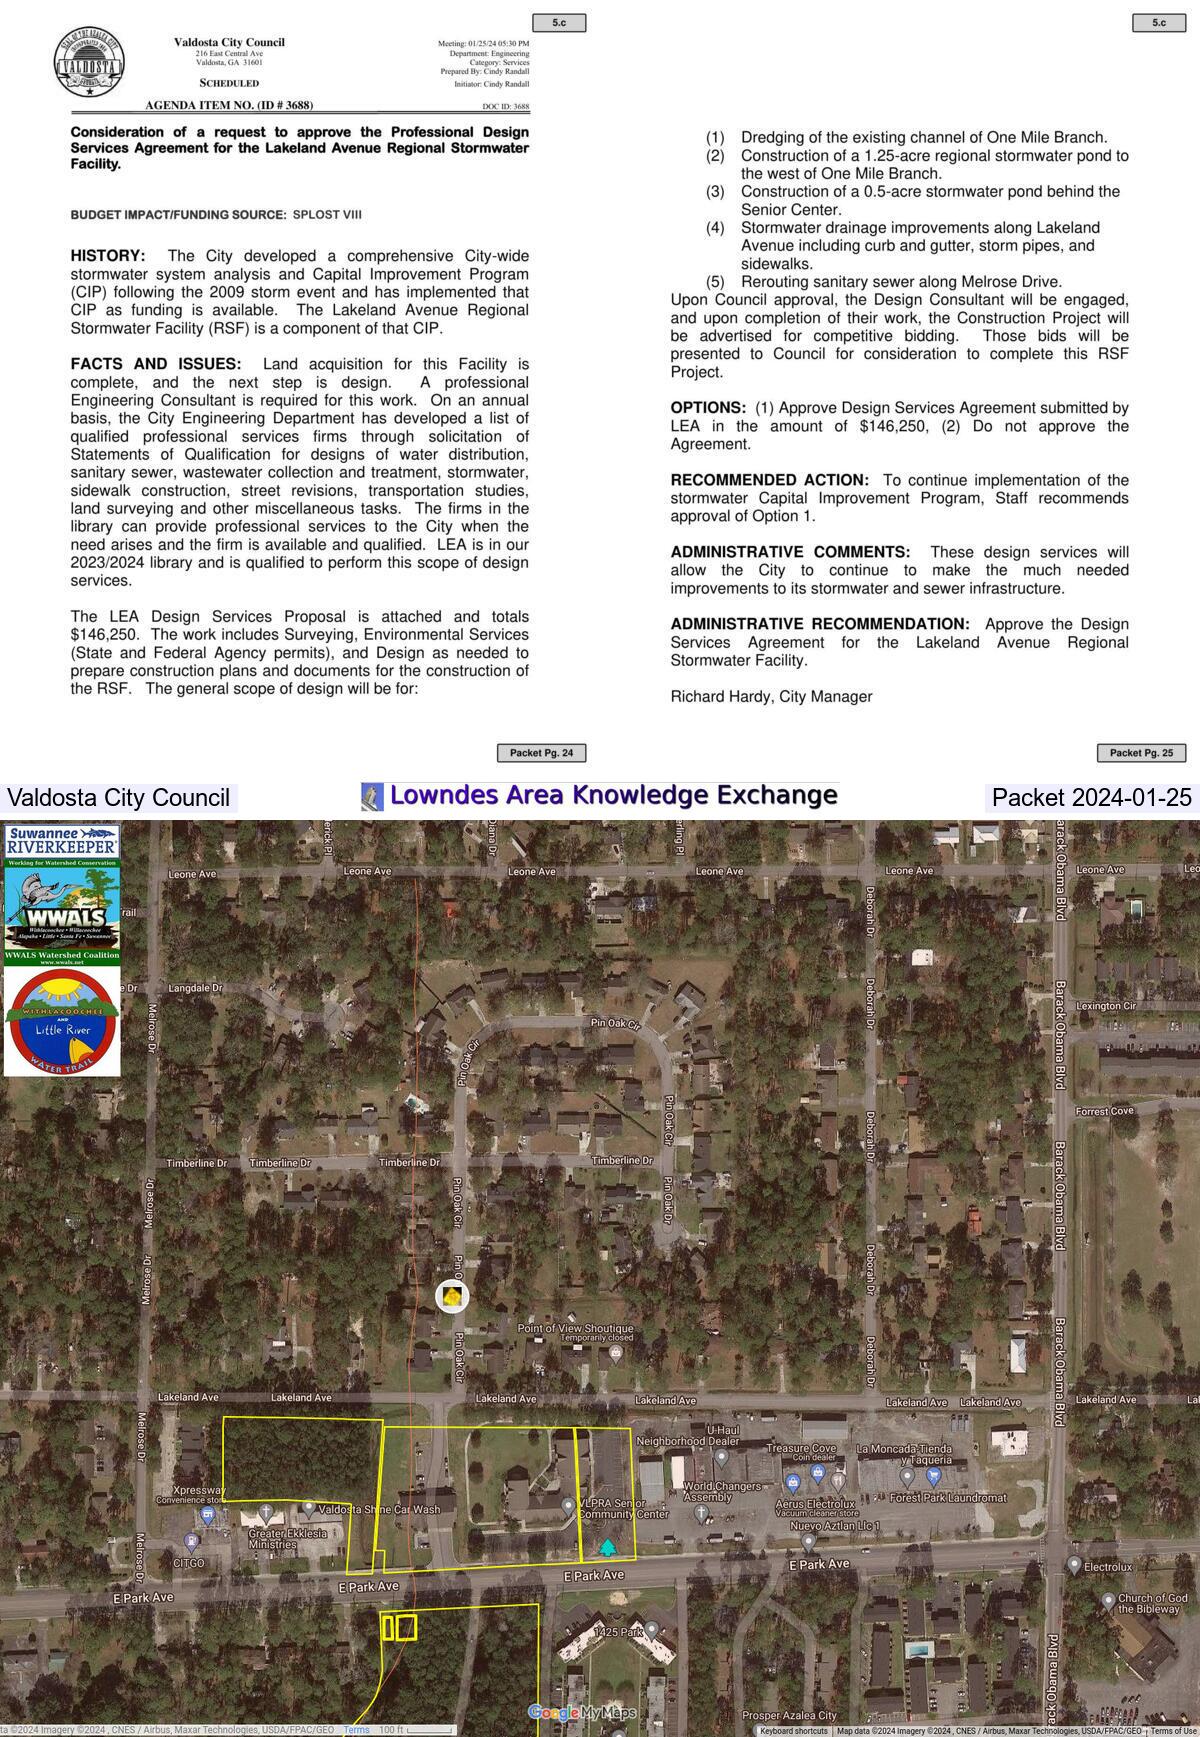 Collage, Valdosta City Council Packet 2024-01-25